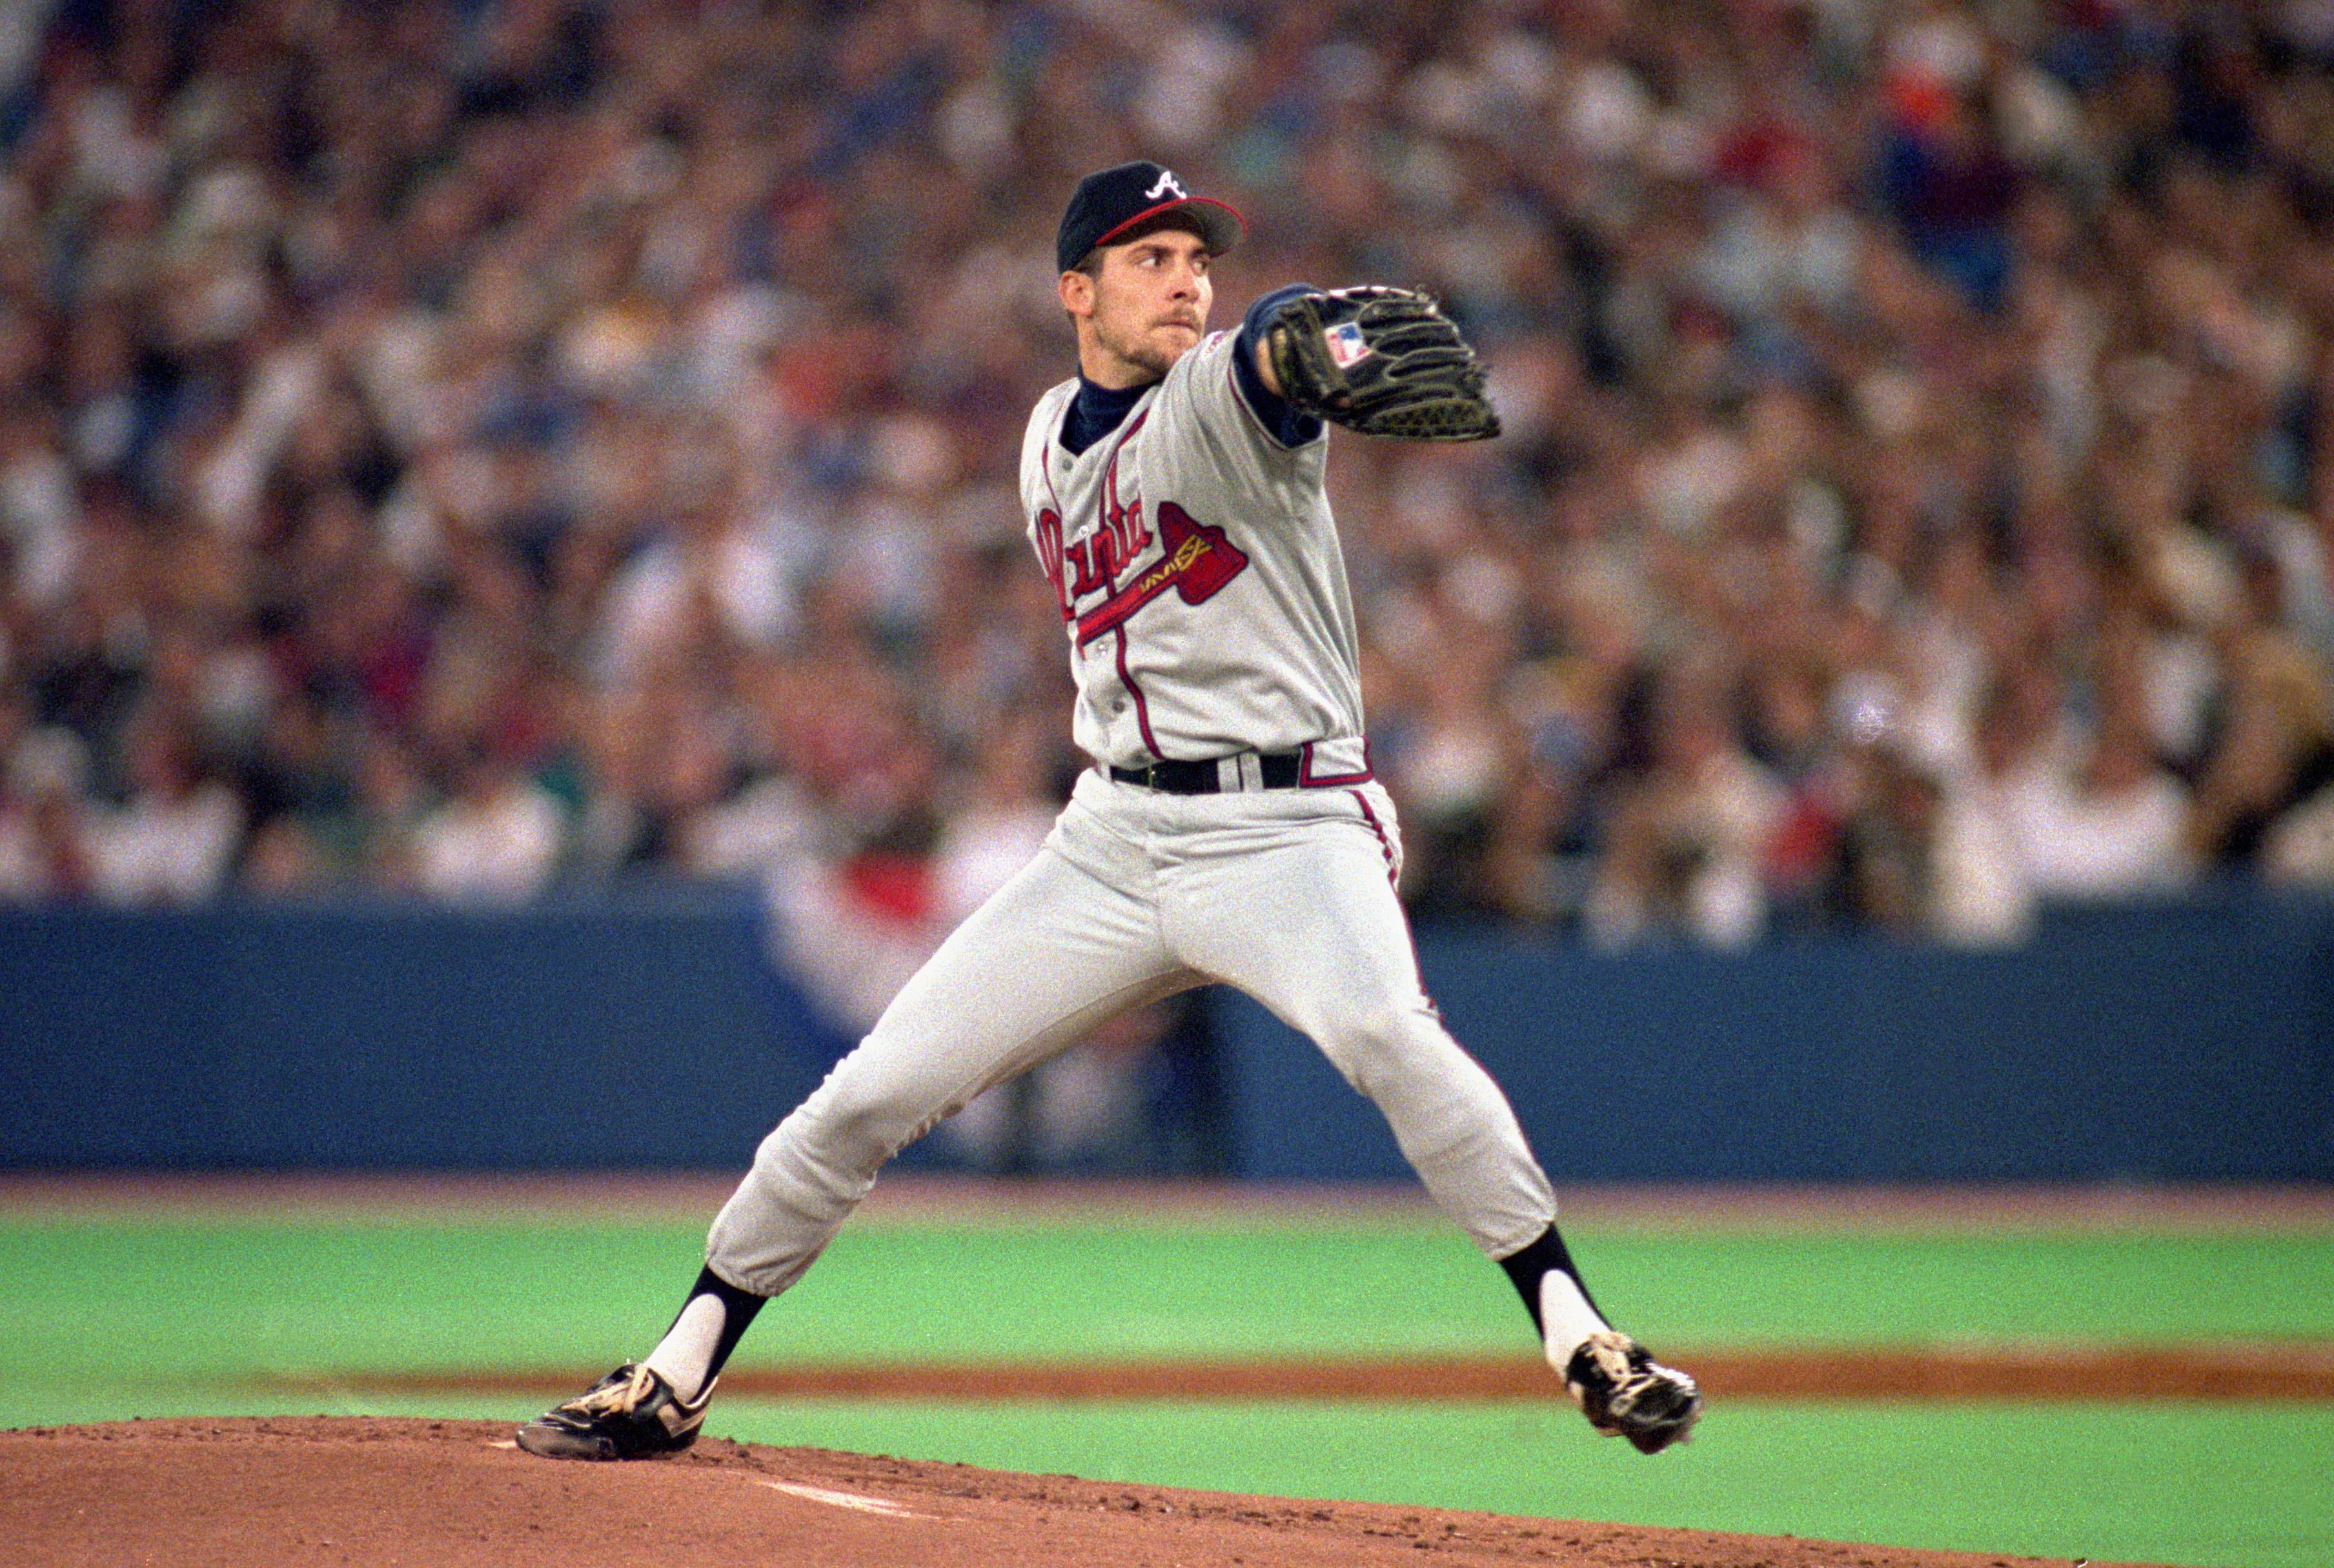 Braves legend John Smoltz's perfect response comparing pitching to golf 